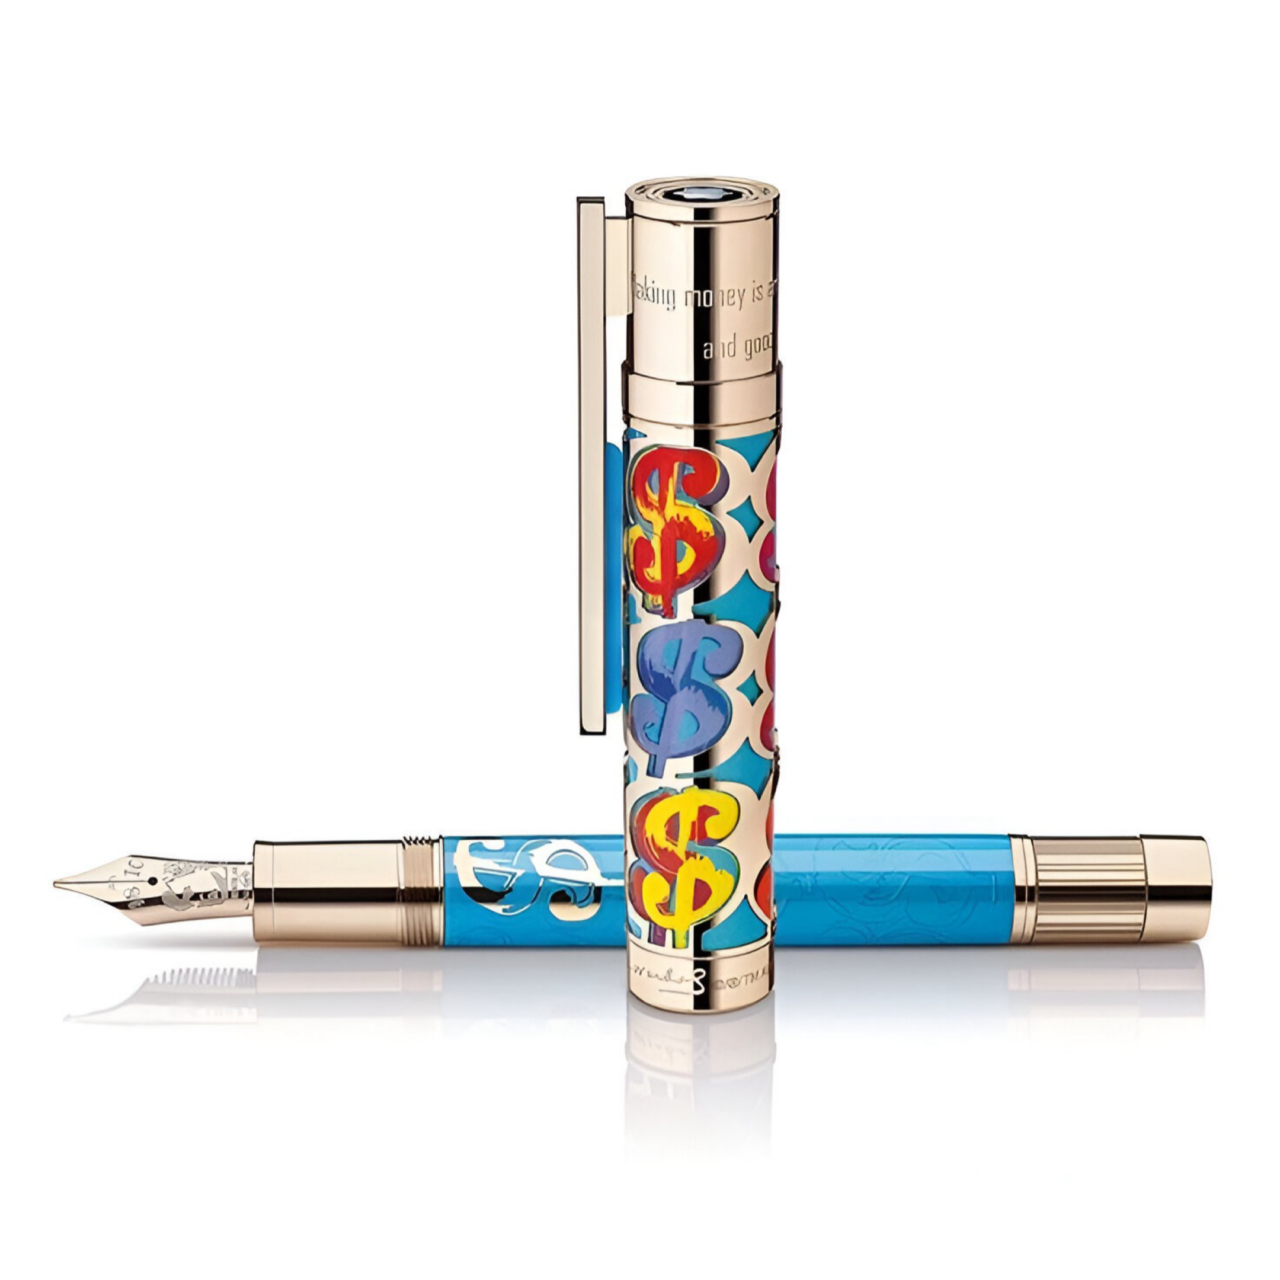 MONTBLANC Montblanc 2015 Great Characters Andy Warhol 100 Limited Edition Fountain Pen